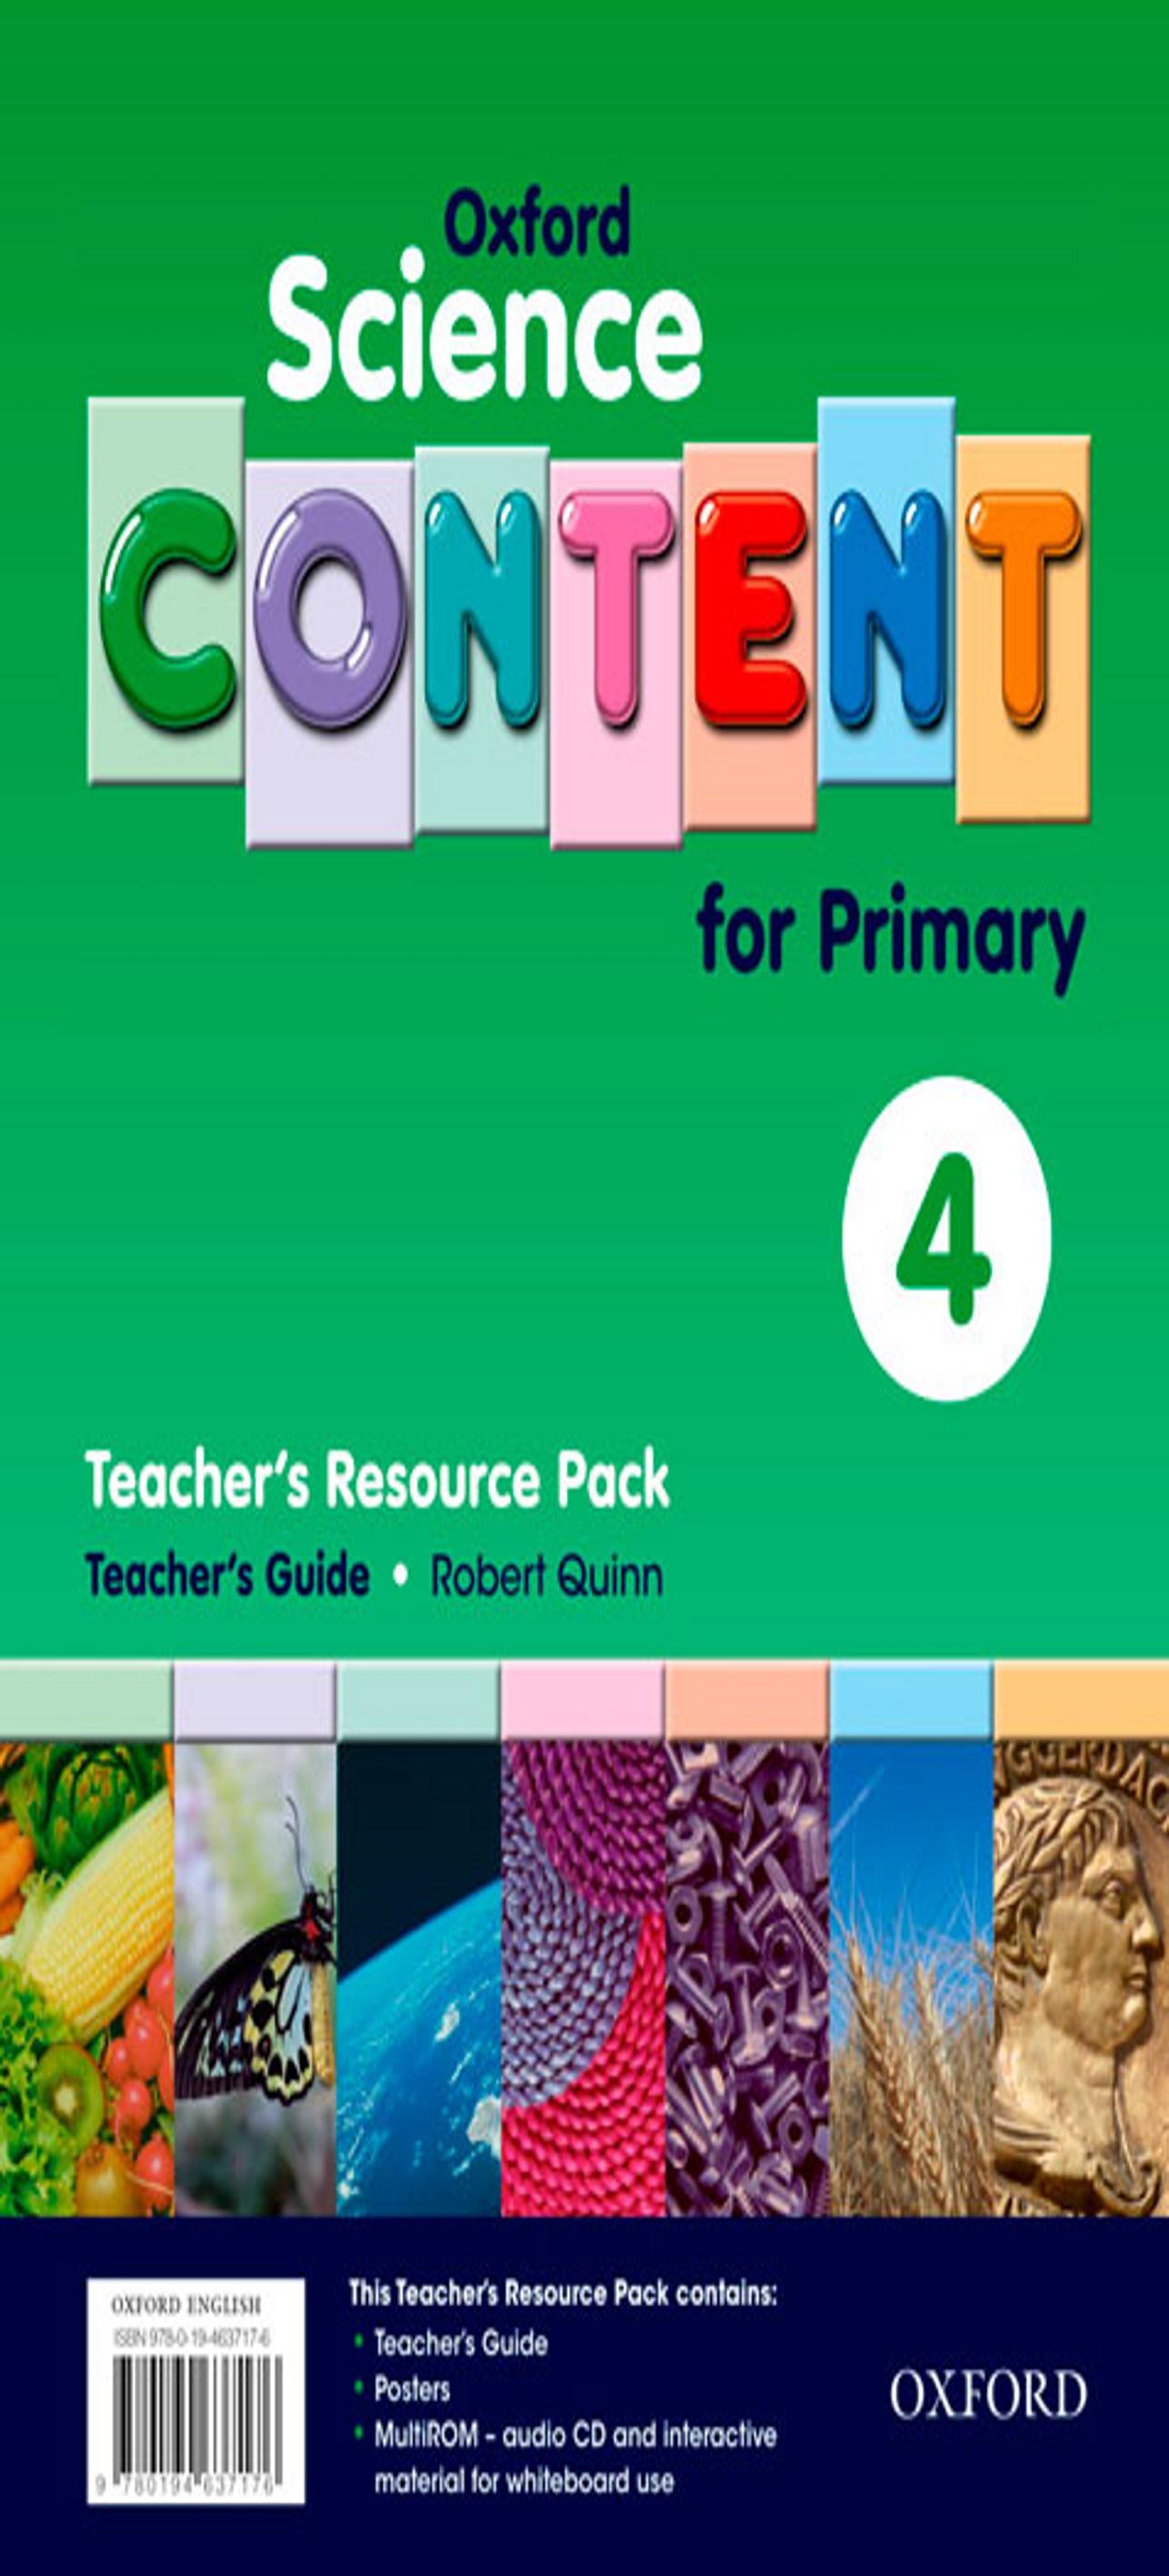 OXFORD SCIENCE CONTENT FOR PRIMARY 4 Teachers Resource Pack